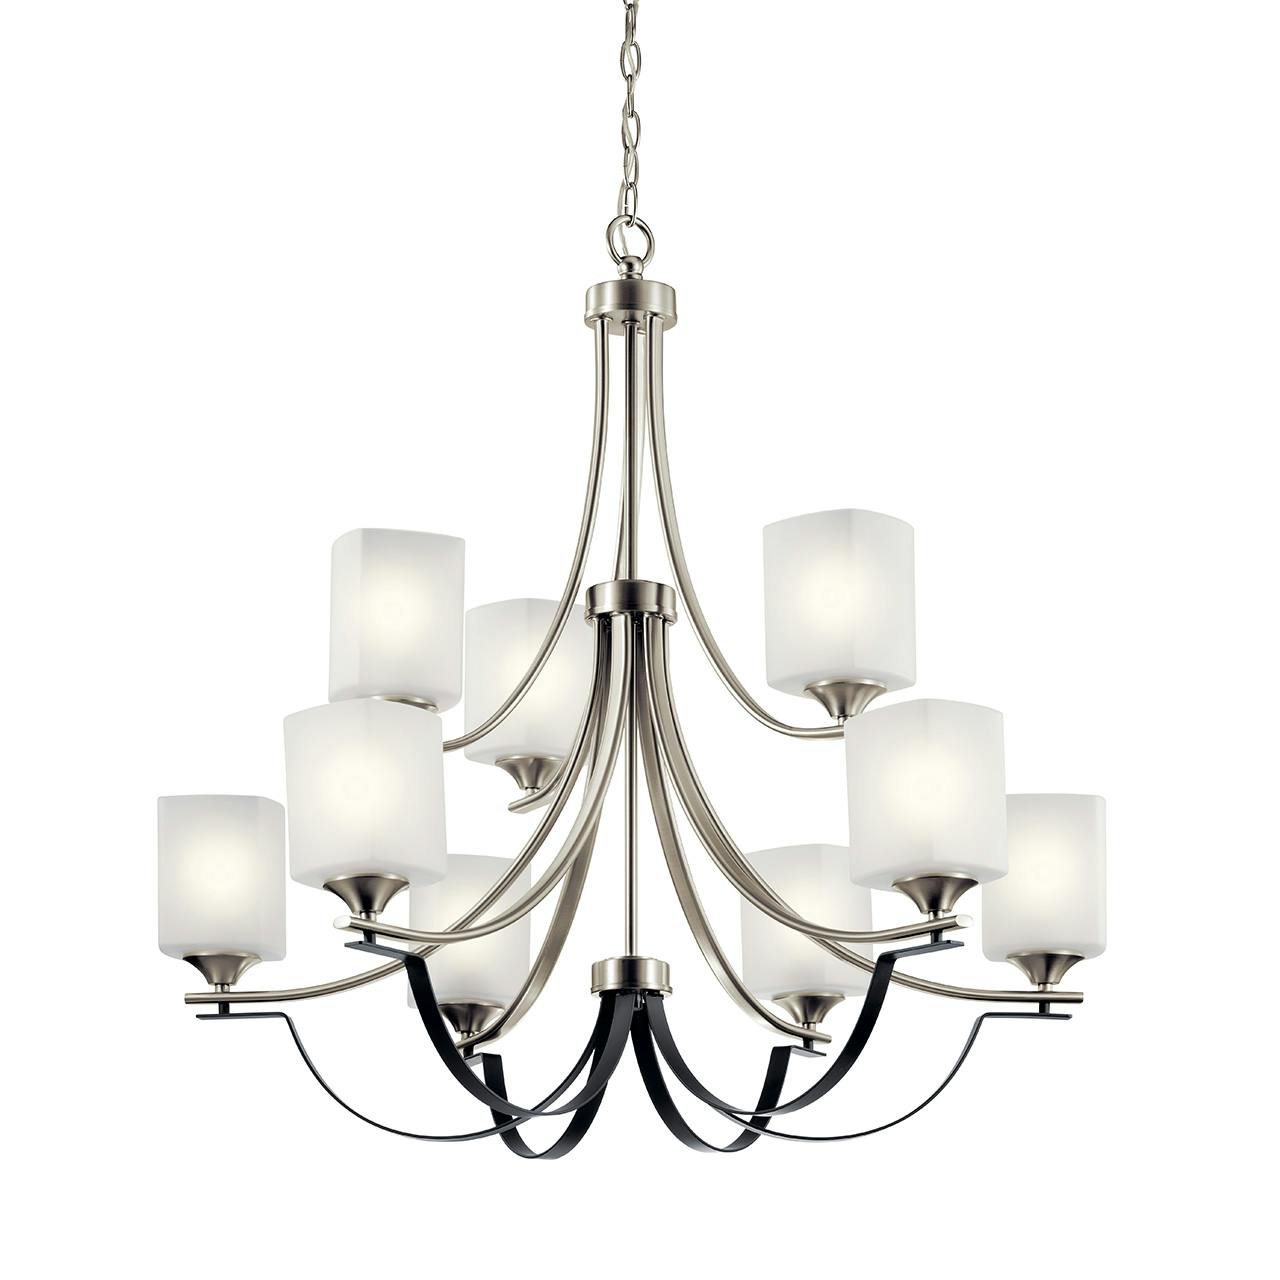 Tula™ 9 Light Chandelier Brushed Nickel without the canopy on a white background